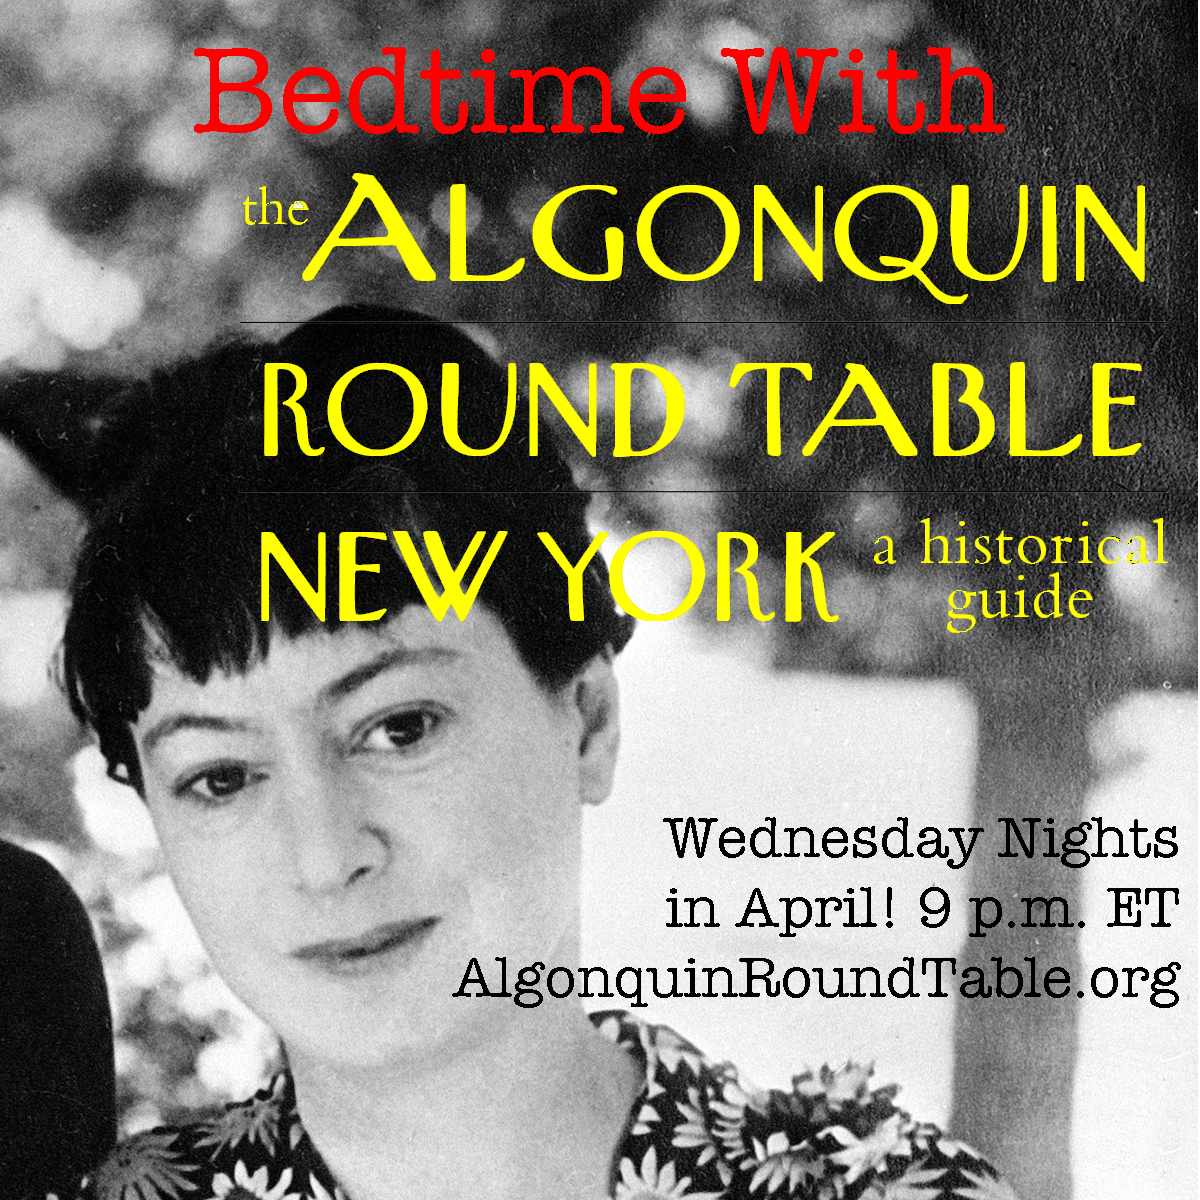 Bedtime With The Algonquin Round Table